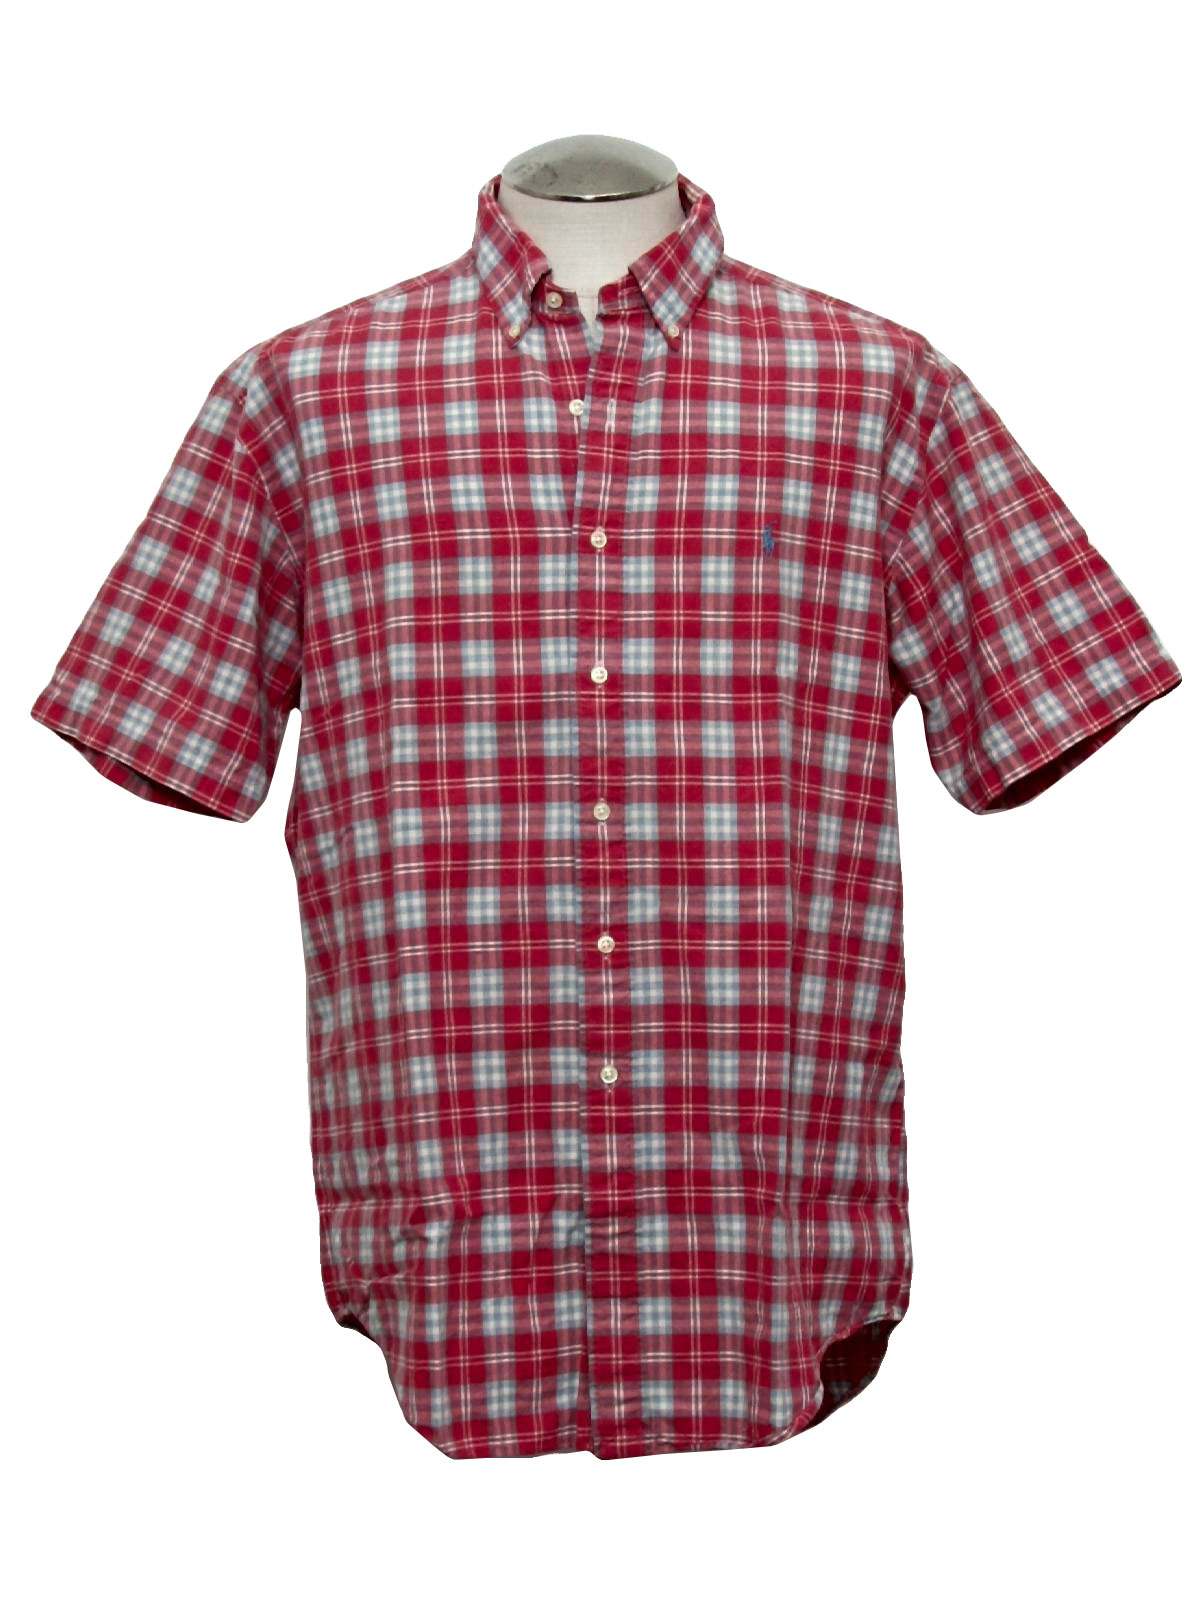 80's Vintage Shirt: 80s -Ralph Lauren- Mens red background, white and ...